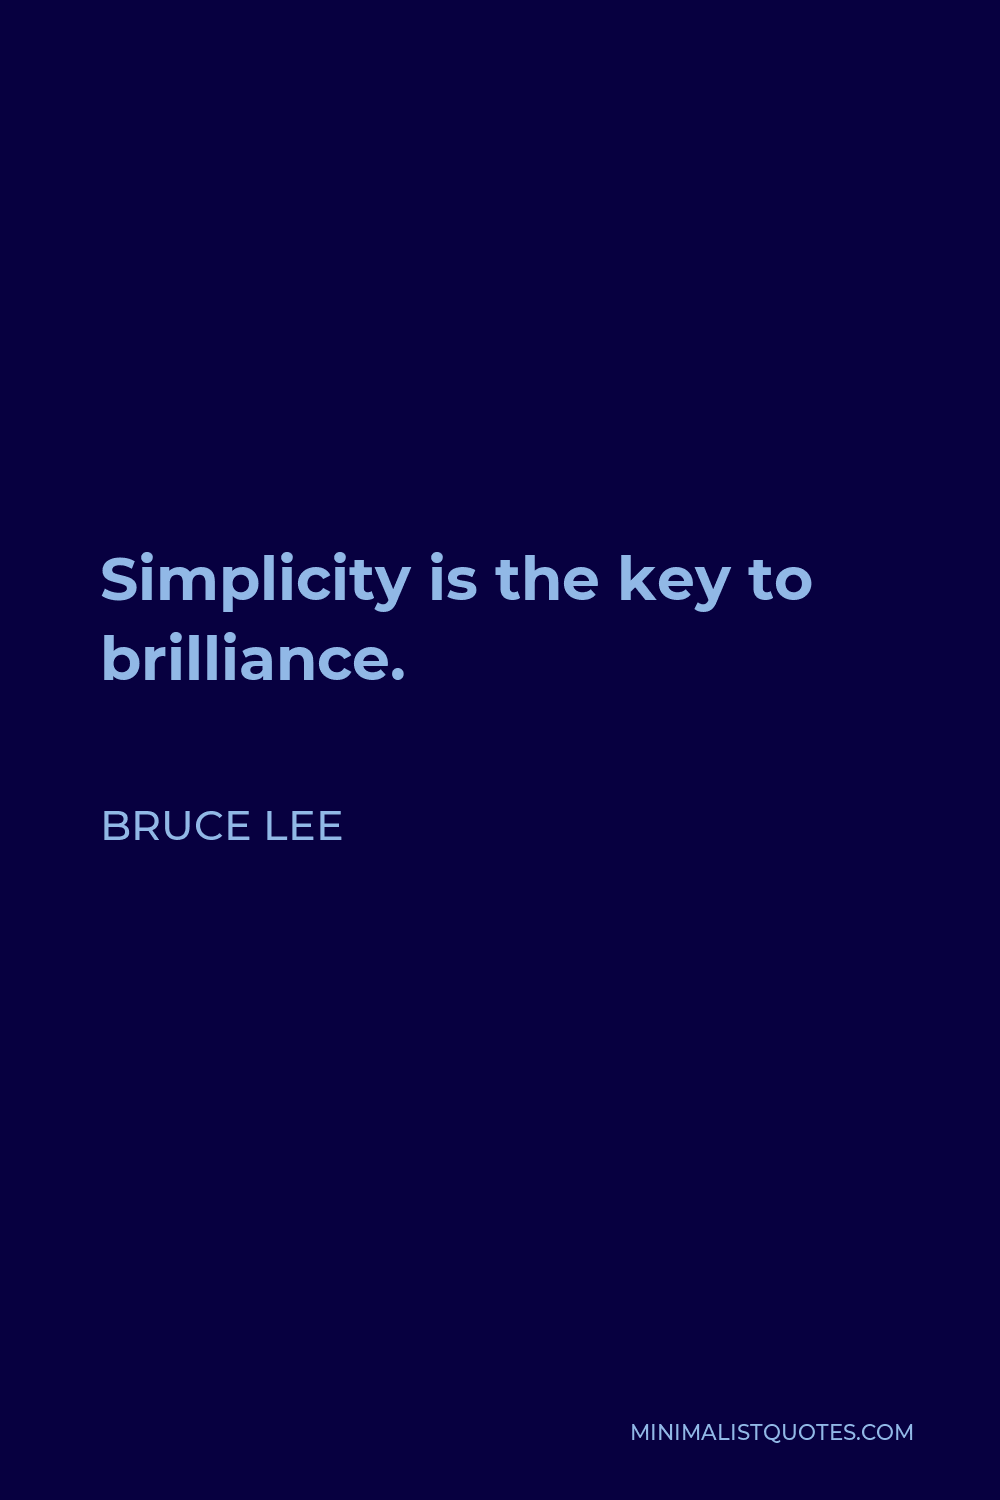 Bruce Lee Quote - Simplicity is the key to brilliance.